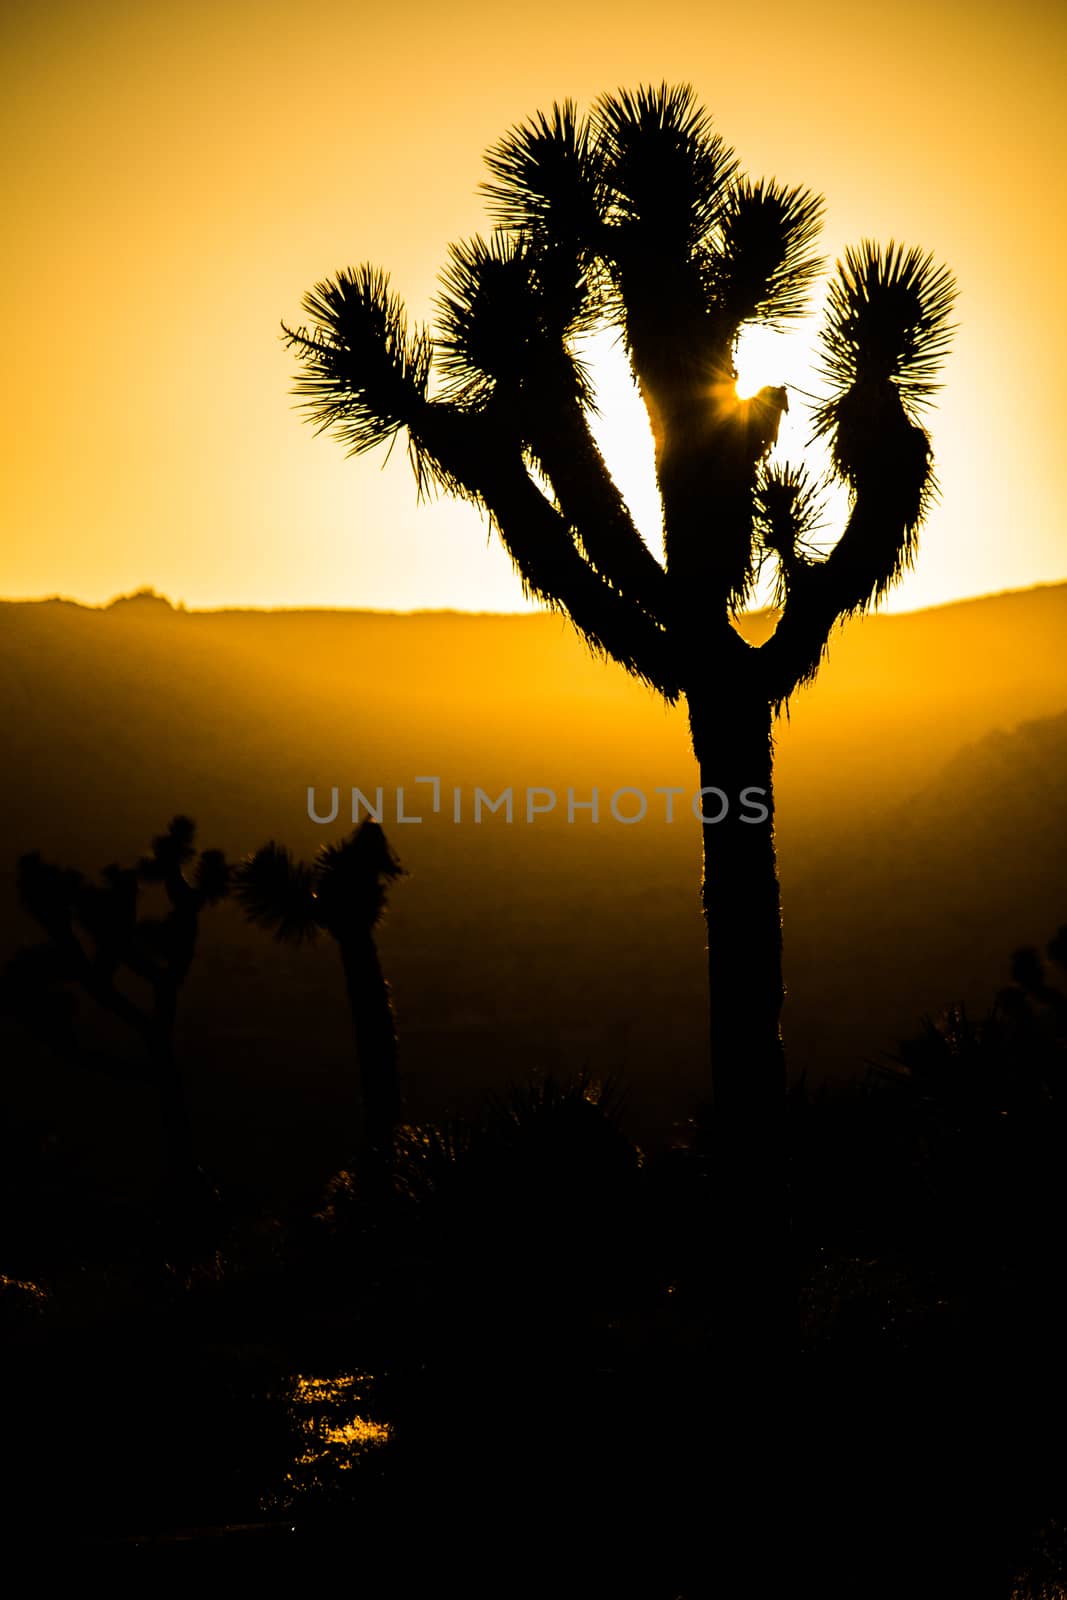 Trees in silhouette during orange sunset, at Joshua Tree National Park, California, USA. by kb79